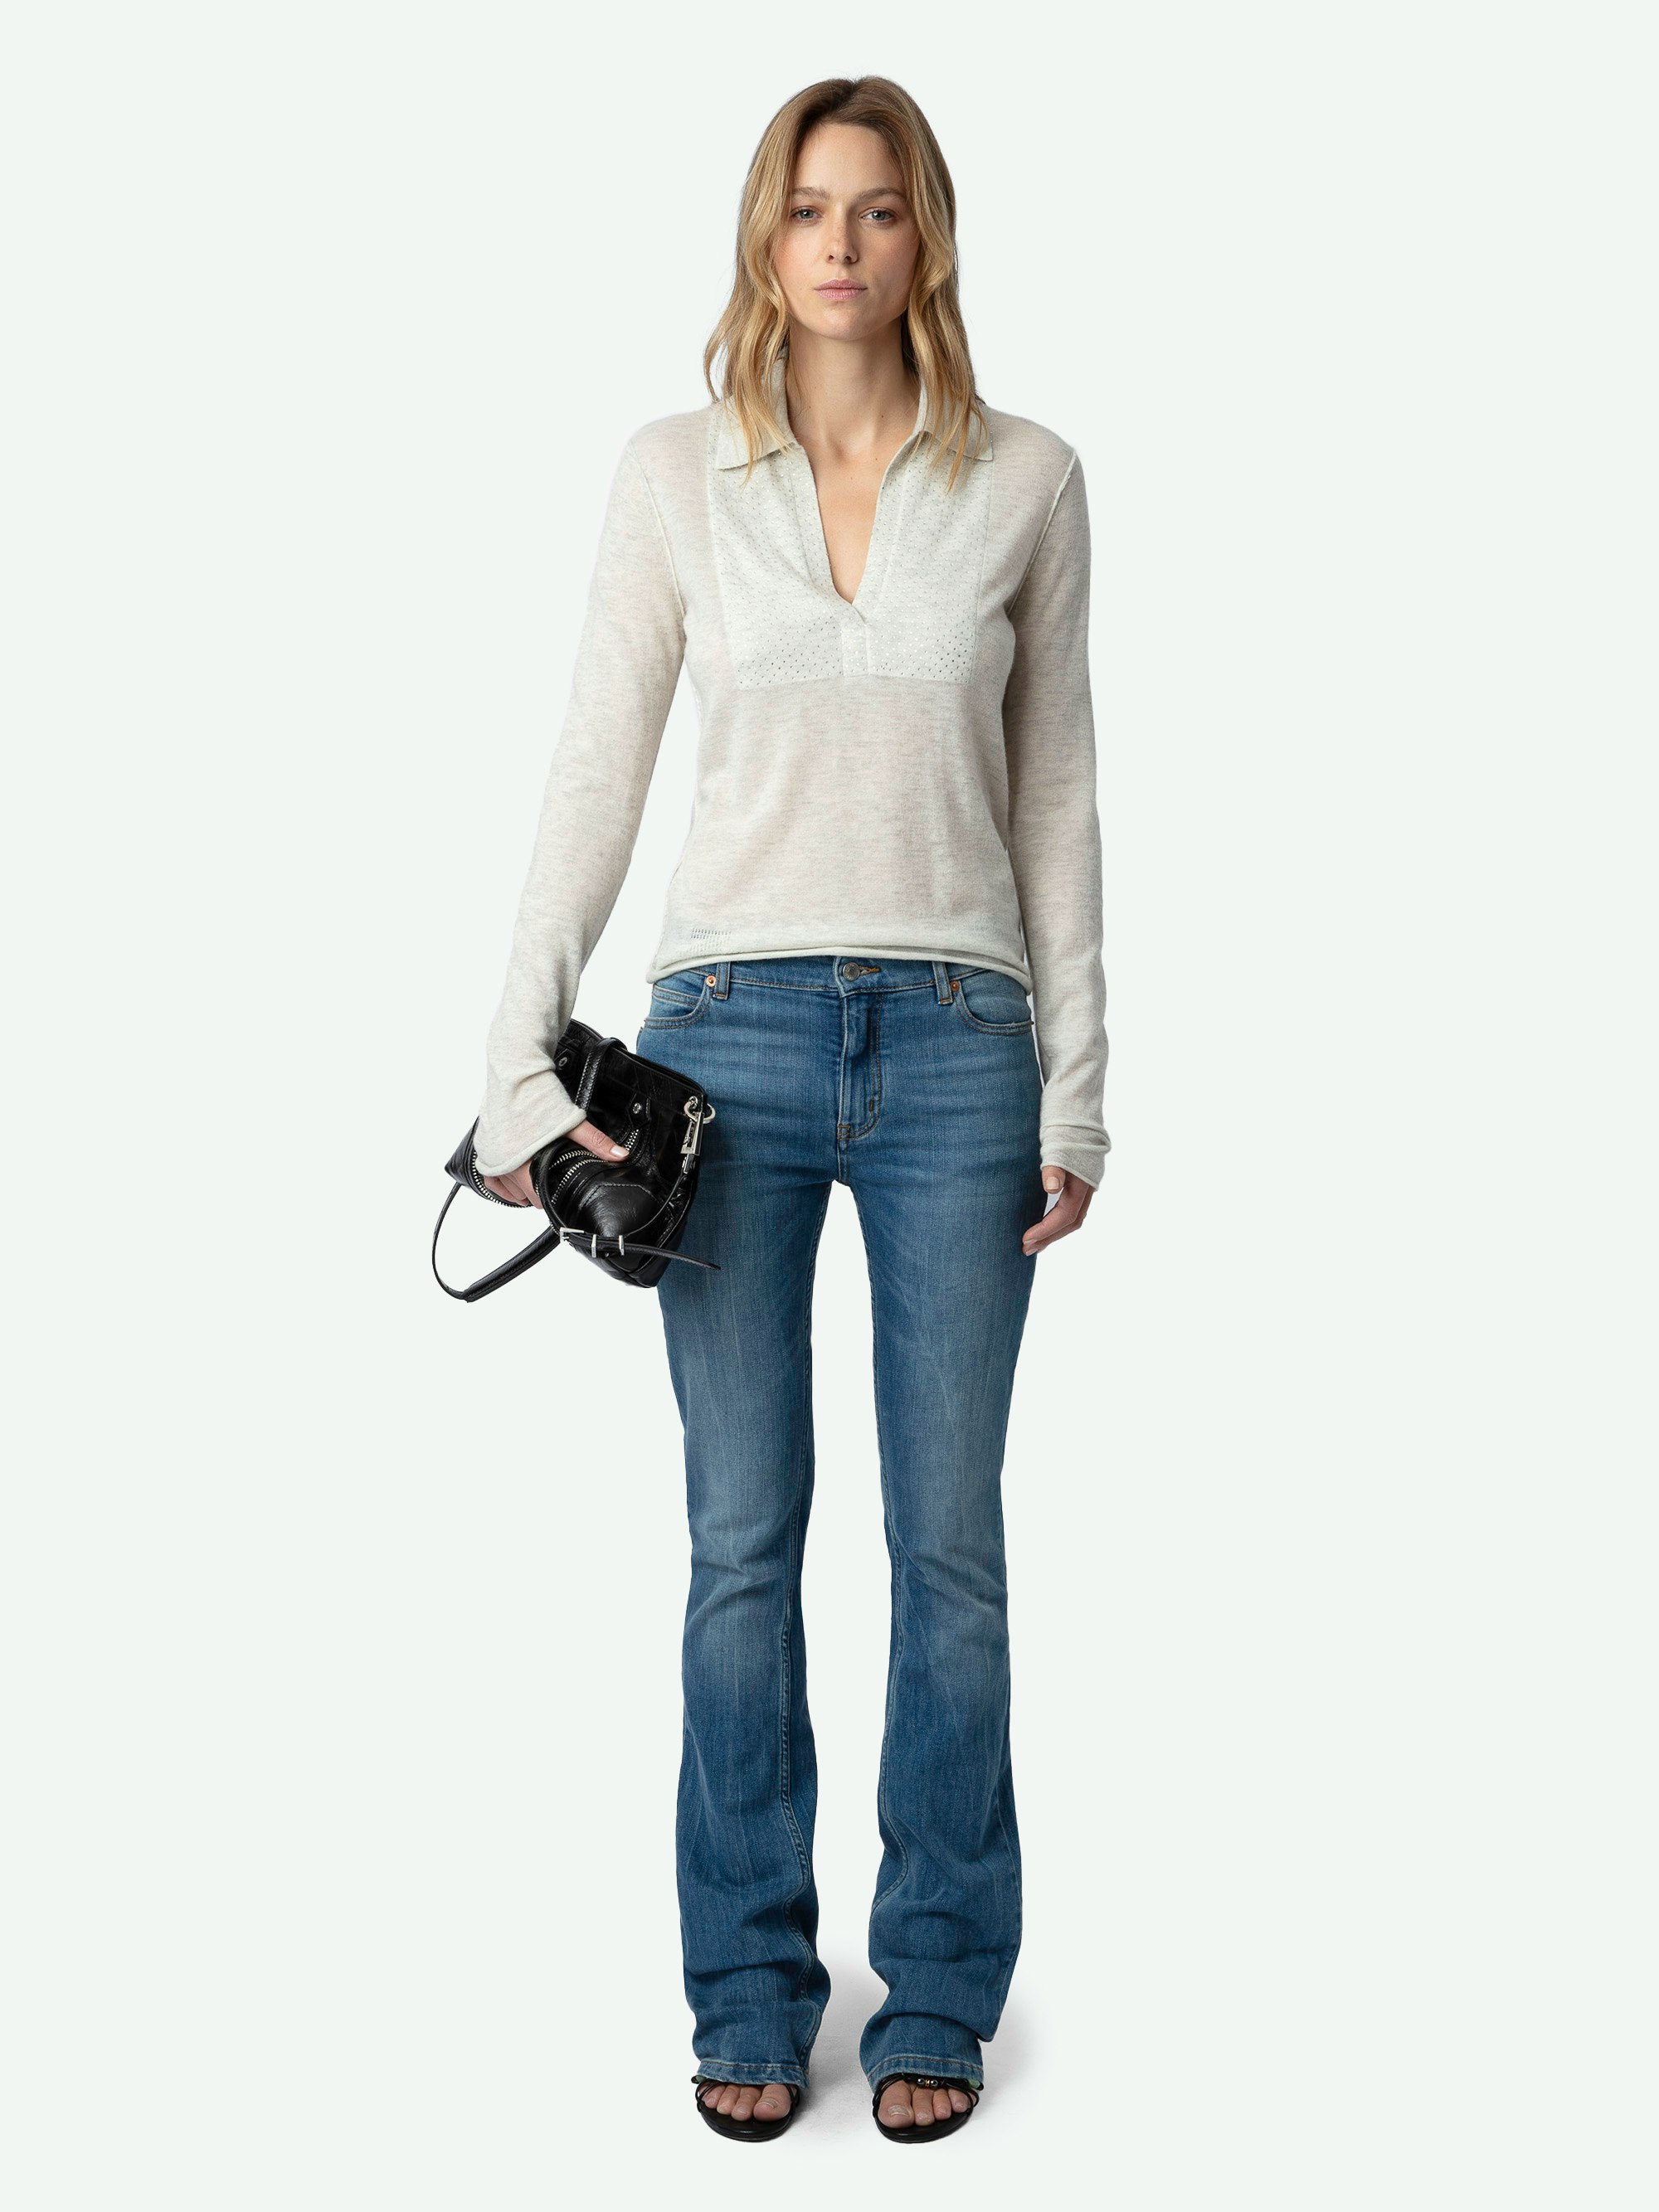 Sally Diamante Cashmere Jumper - Long-sleeved feather cashmere jumper with polo V-neck and diamante-embellished front panel.